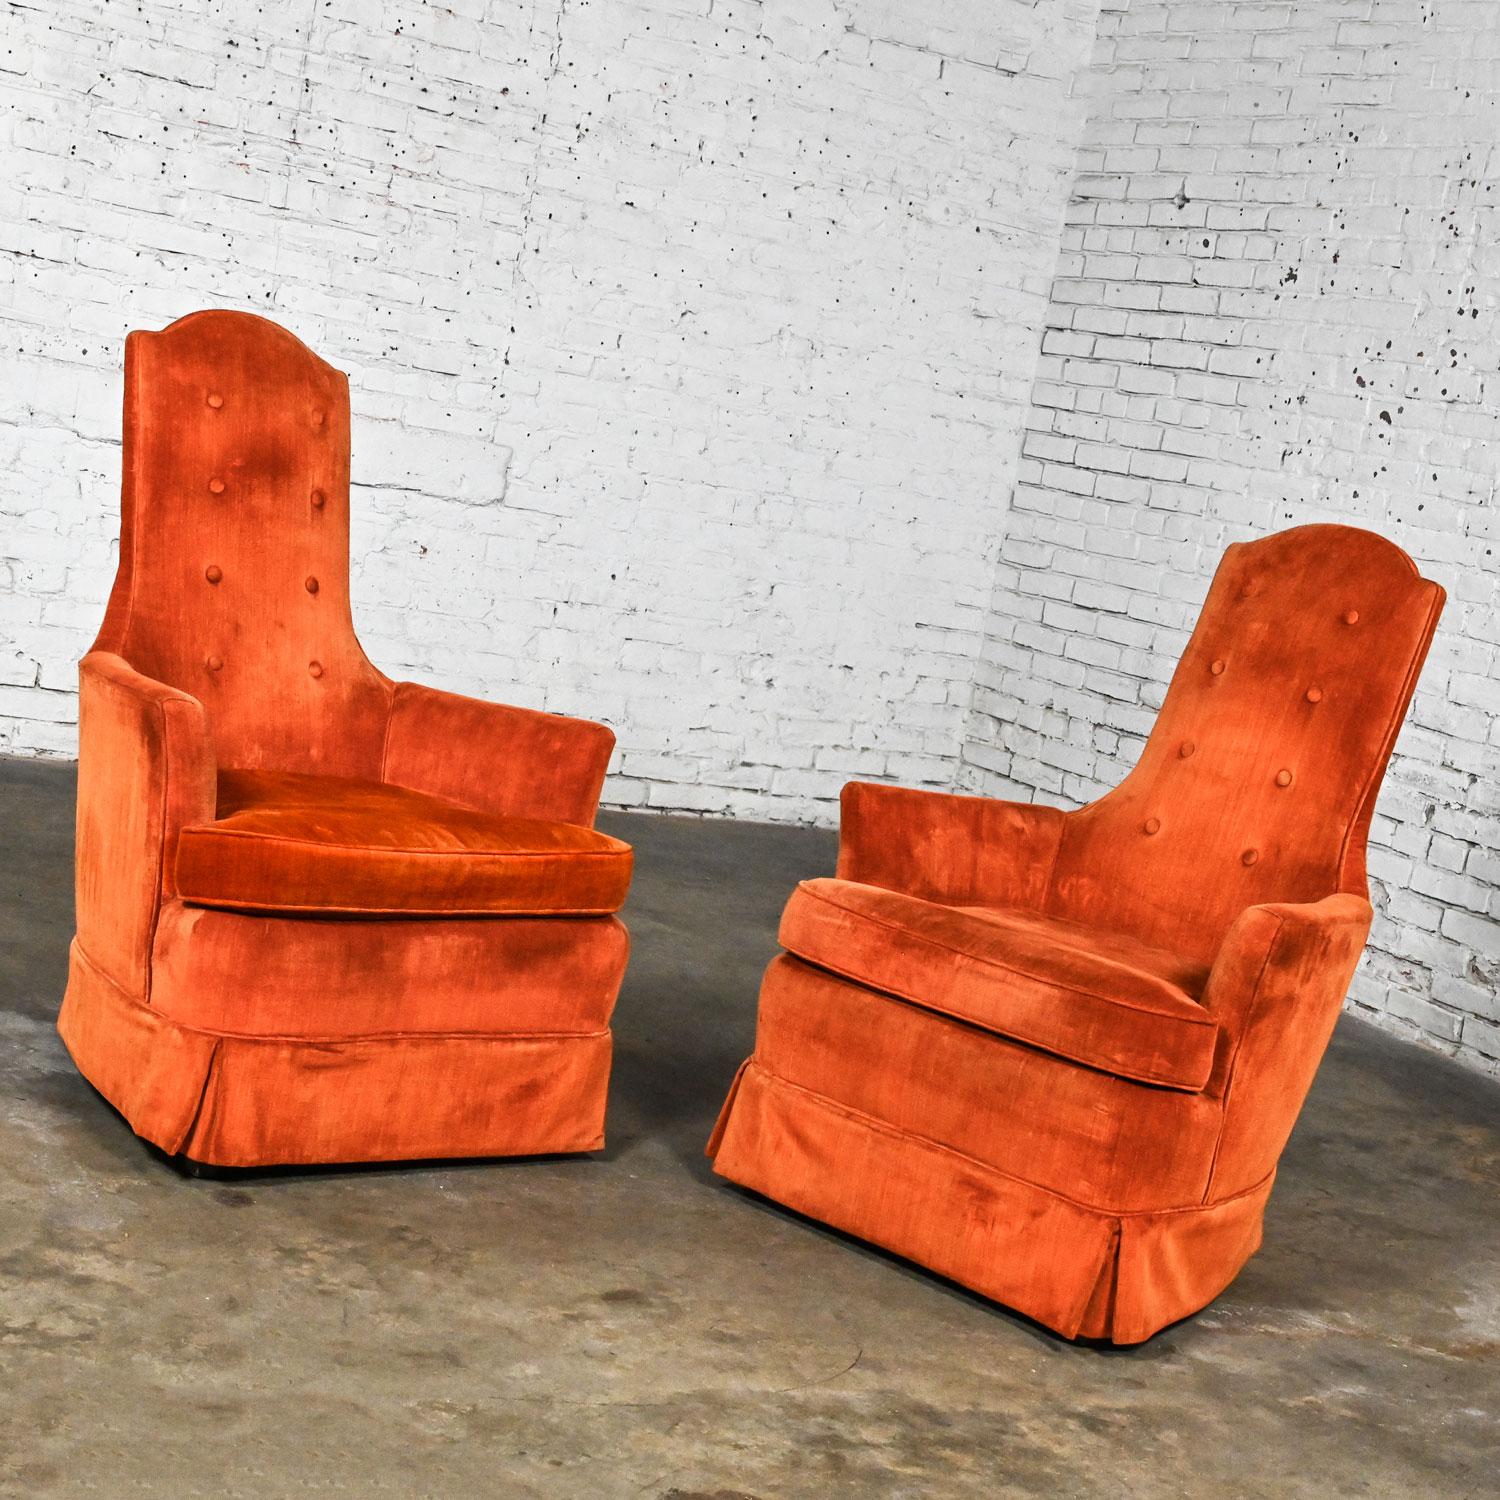 Stunning vintage Hollywood Regency lounge or club high back chairs with orange velvet fabric by Perfection Furniture, a pair. Beautiful condition, keeping in mind that these are vintage and not new so will have signs of use and wear. There is a tiny